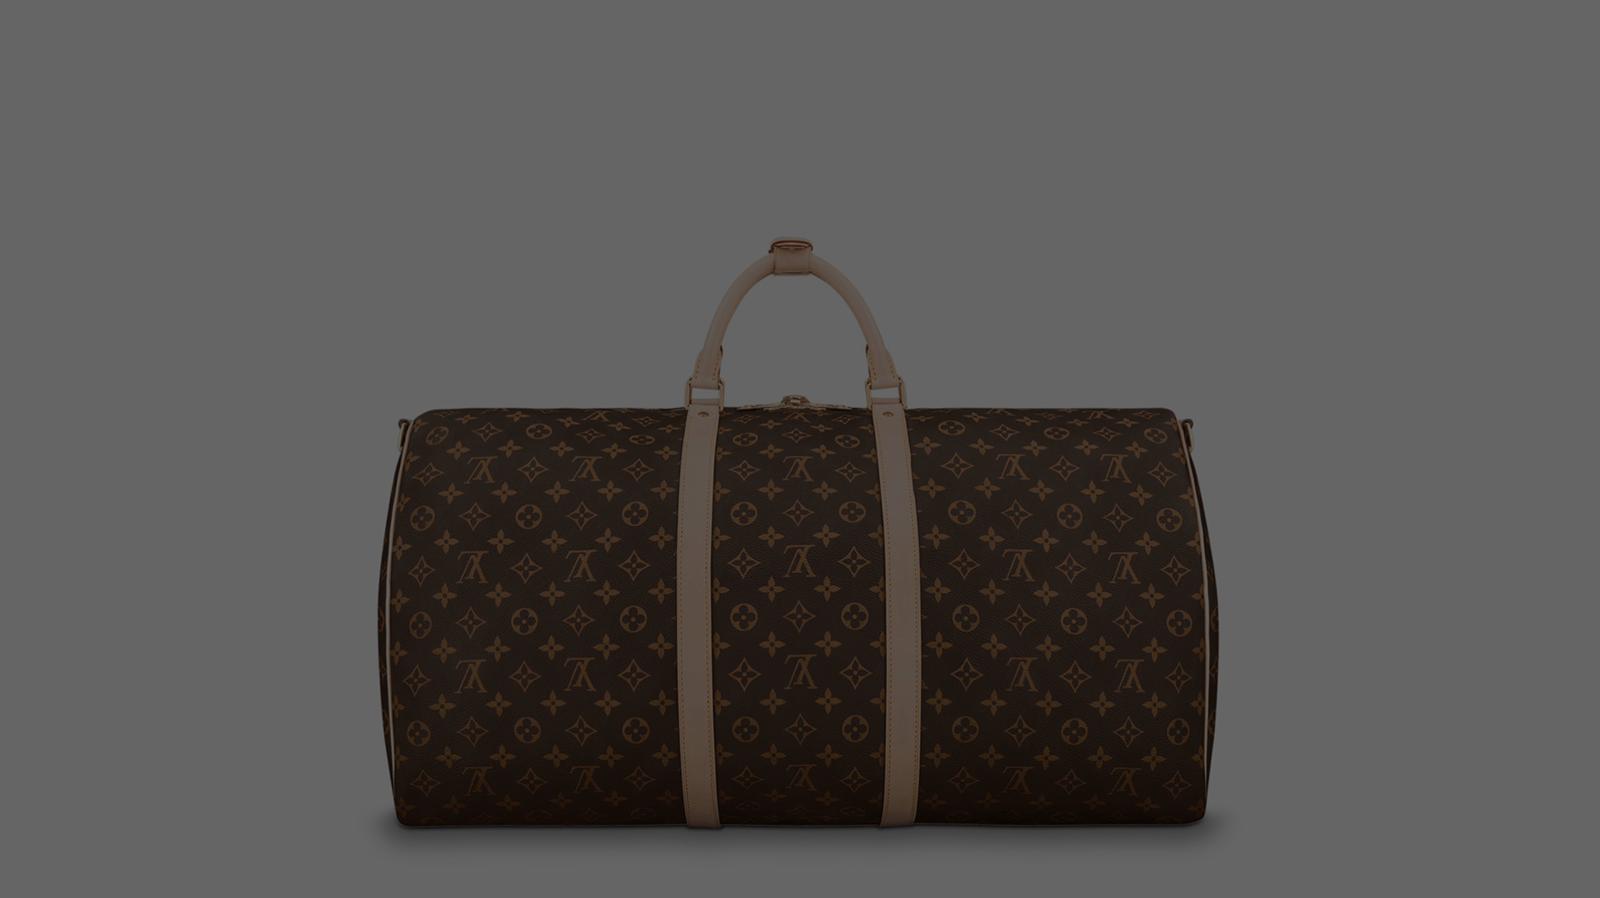 authentic louis vuitton keepall 60 for Sale in Safety Harbor, FL